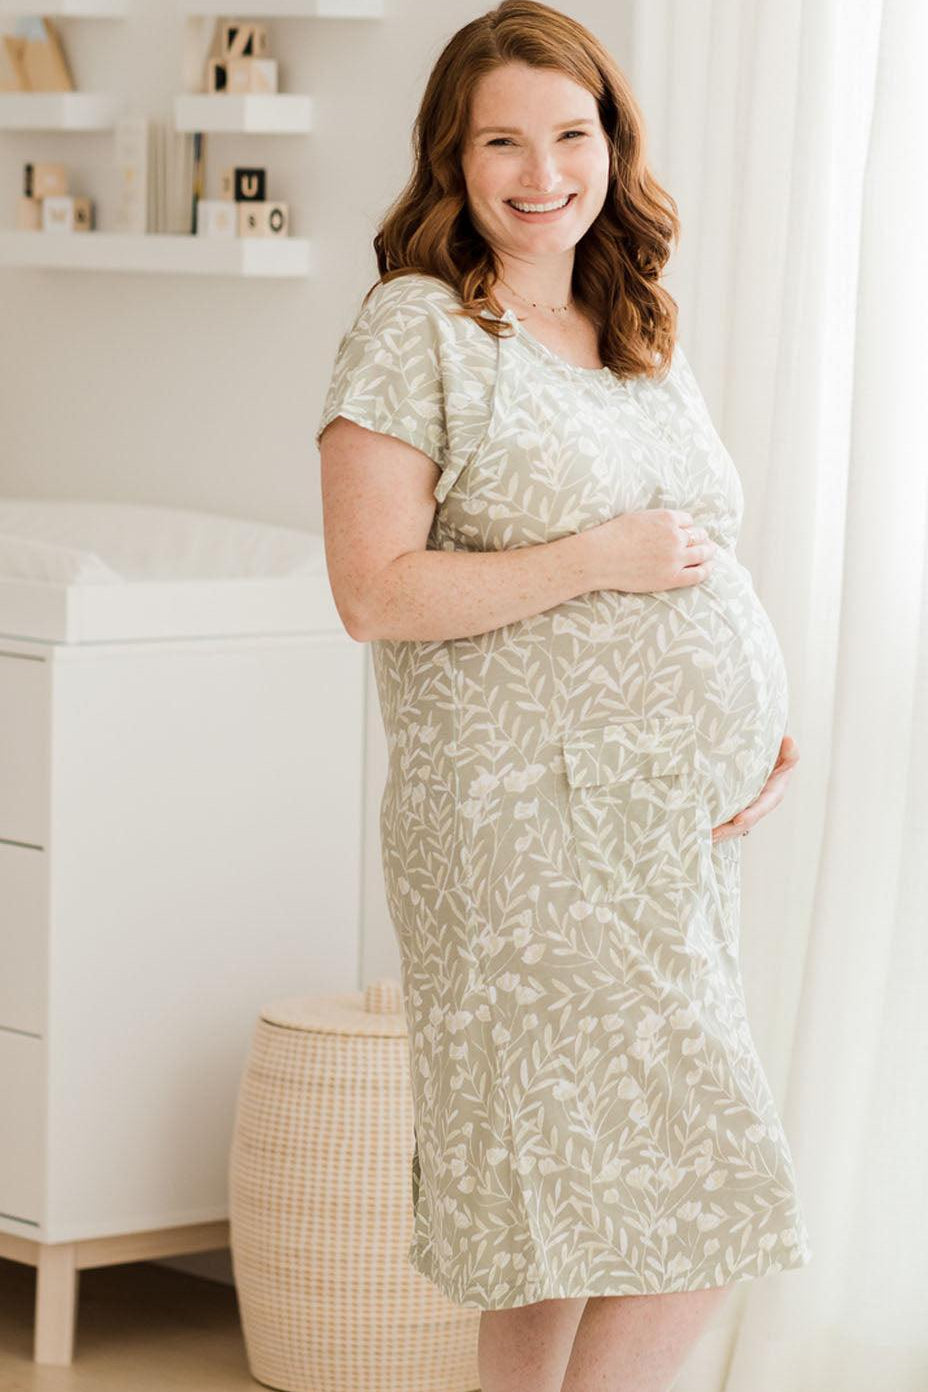 Universal Labor and Delivery Gown in Fern - Milk & Baby 